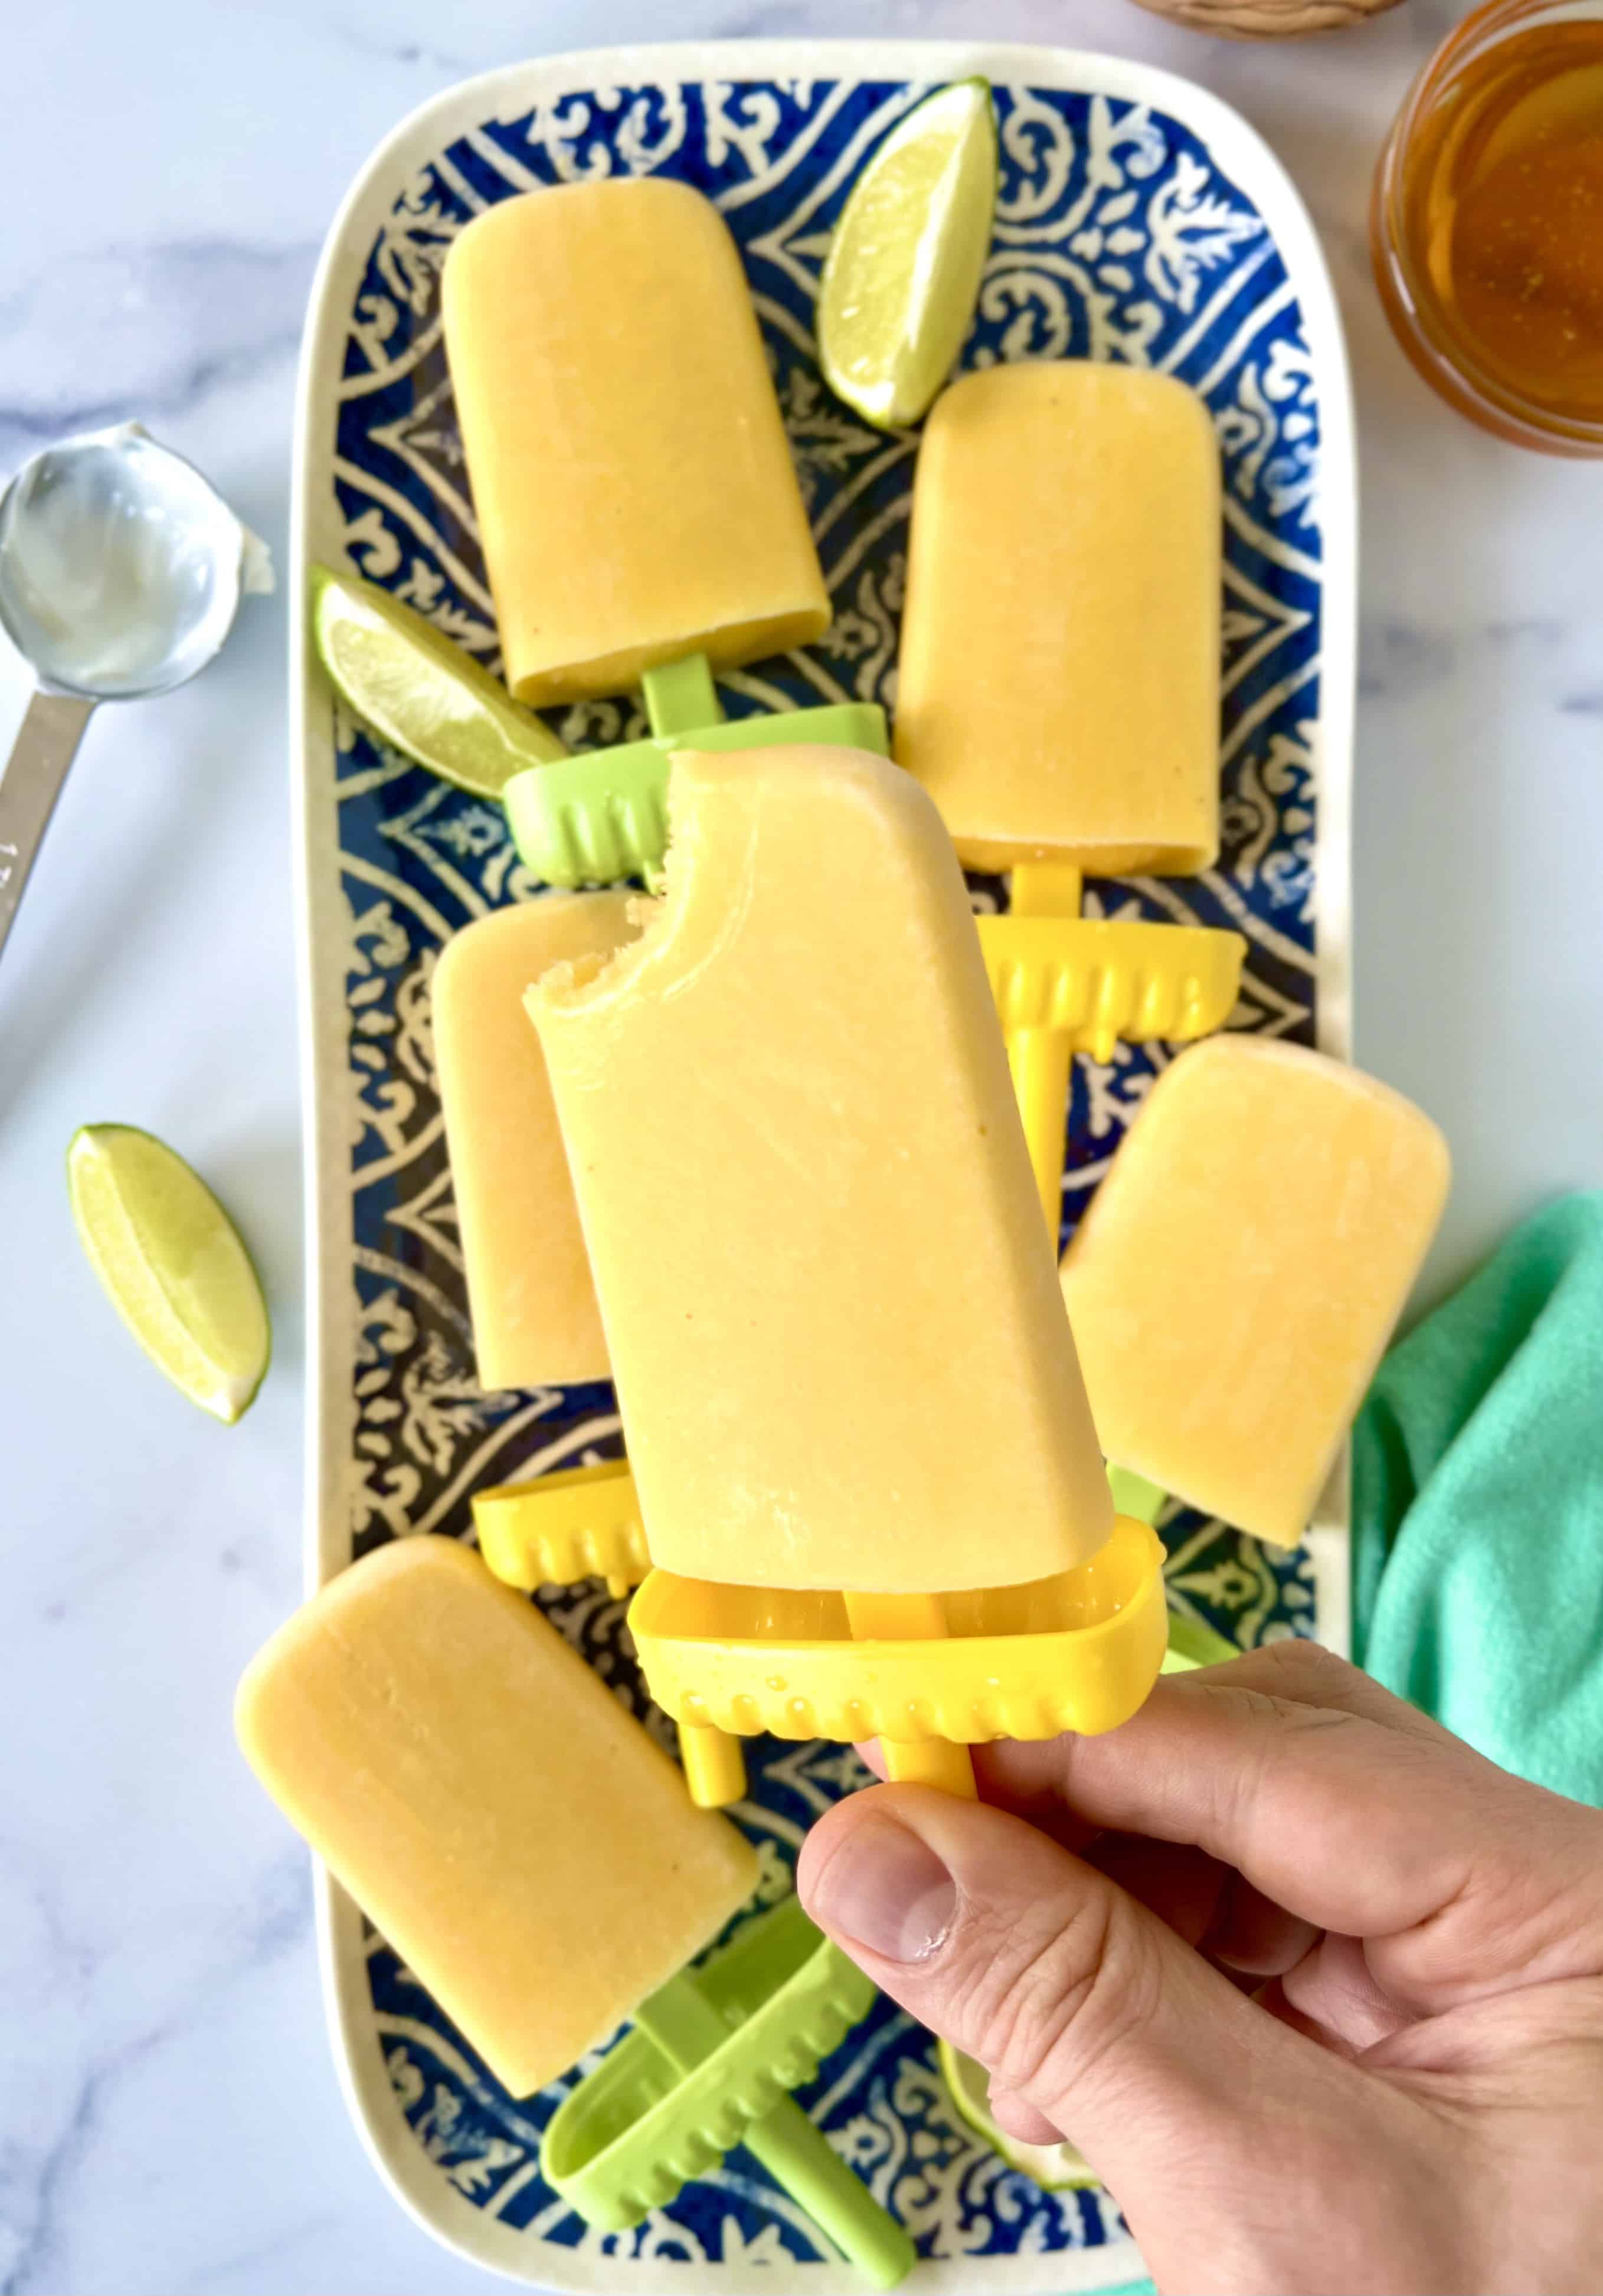 Frozen mango and yogurt popsicles on blue and white patterned platter with a hand holding one of the pops above them.